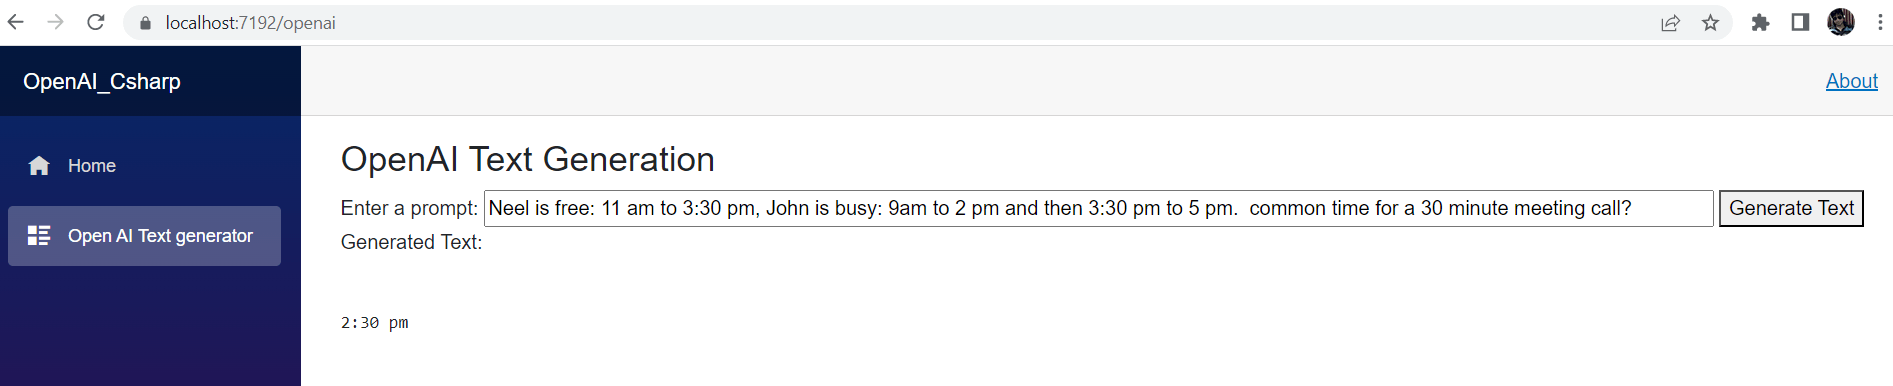 Prompt: Neel is free 11 am to 3:30 pm, John is busy 9am to 2 pm and then 3:30 pm to 5 pm. Common time for a 30 minute meeting call? Generated text: 2:30 pm